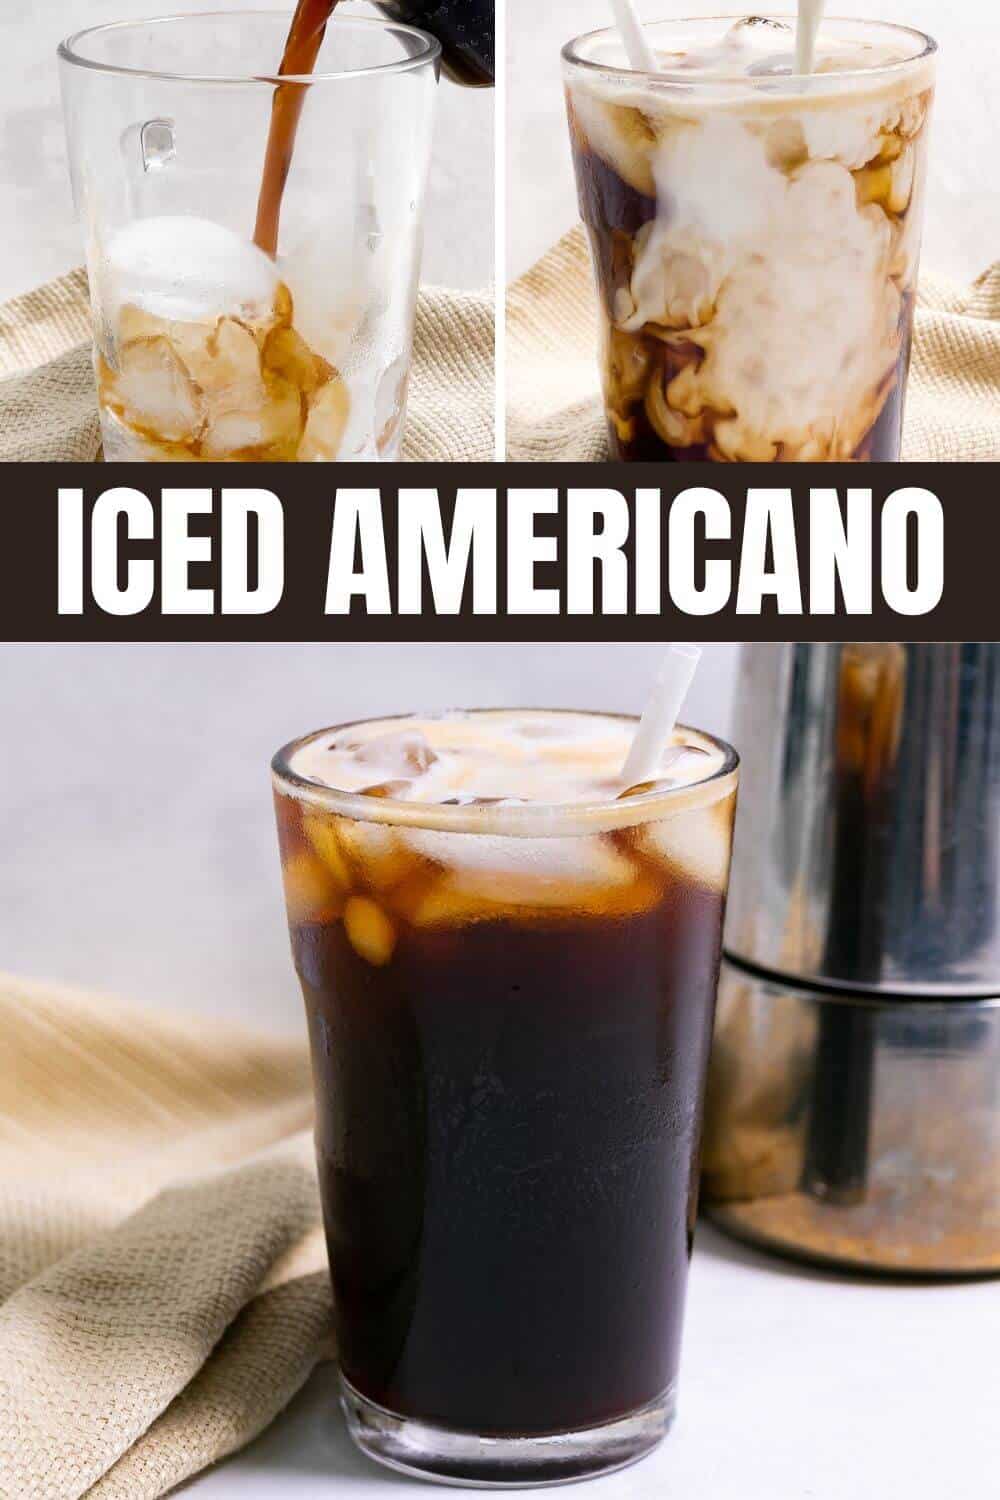 Iced Americano with process shot and recipe title text overlay.